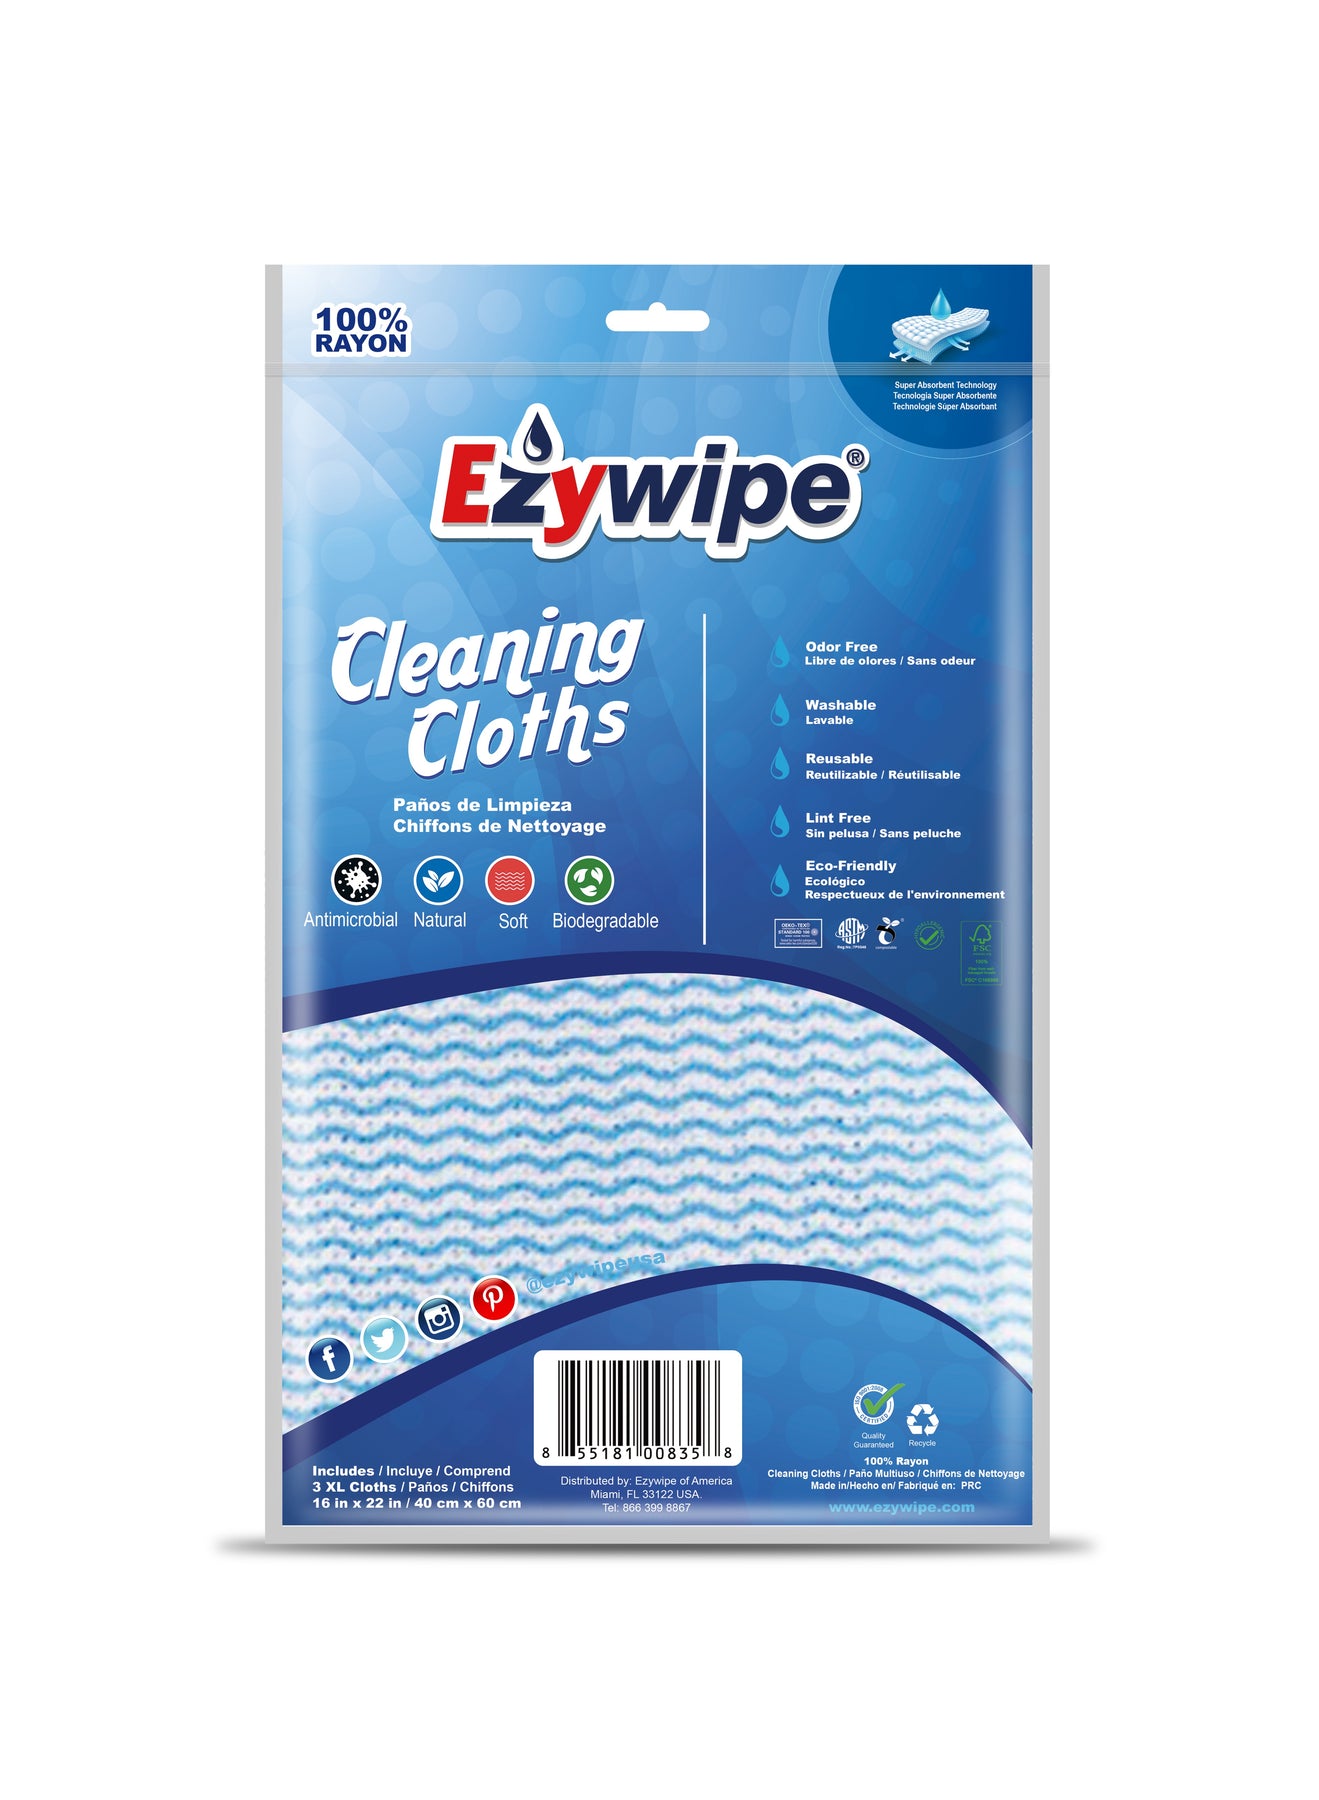 Multipurpose Cleaning Cloth Extra Large. Bag with 3 cloths.